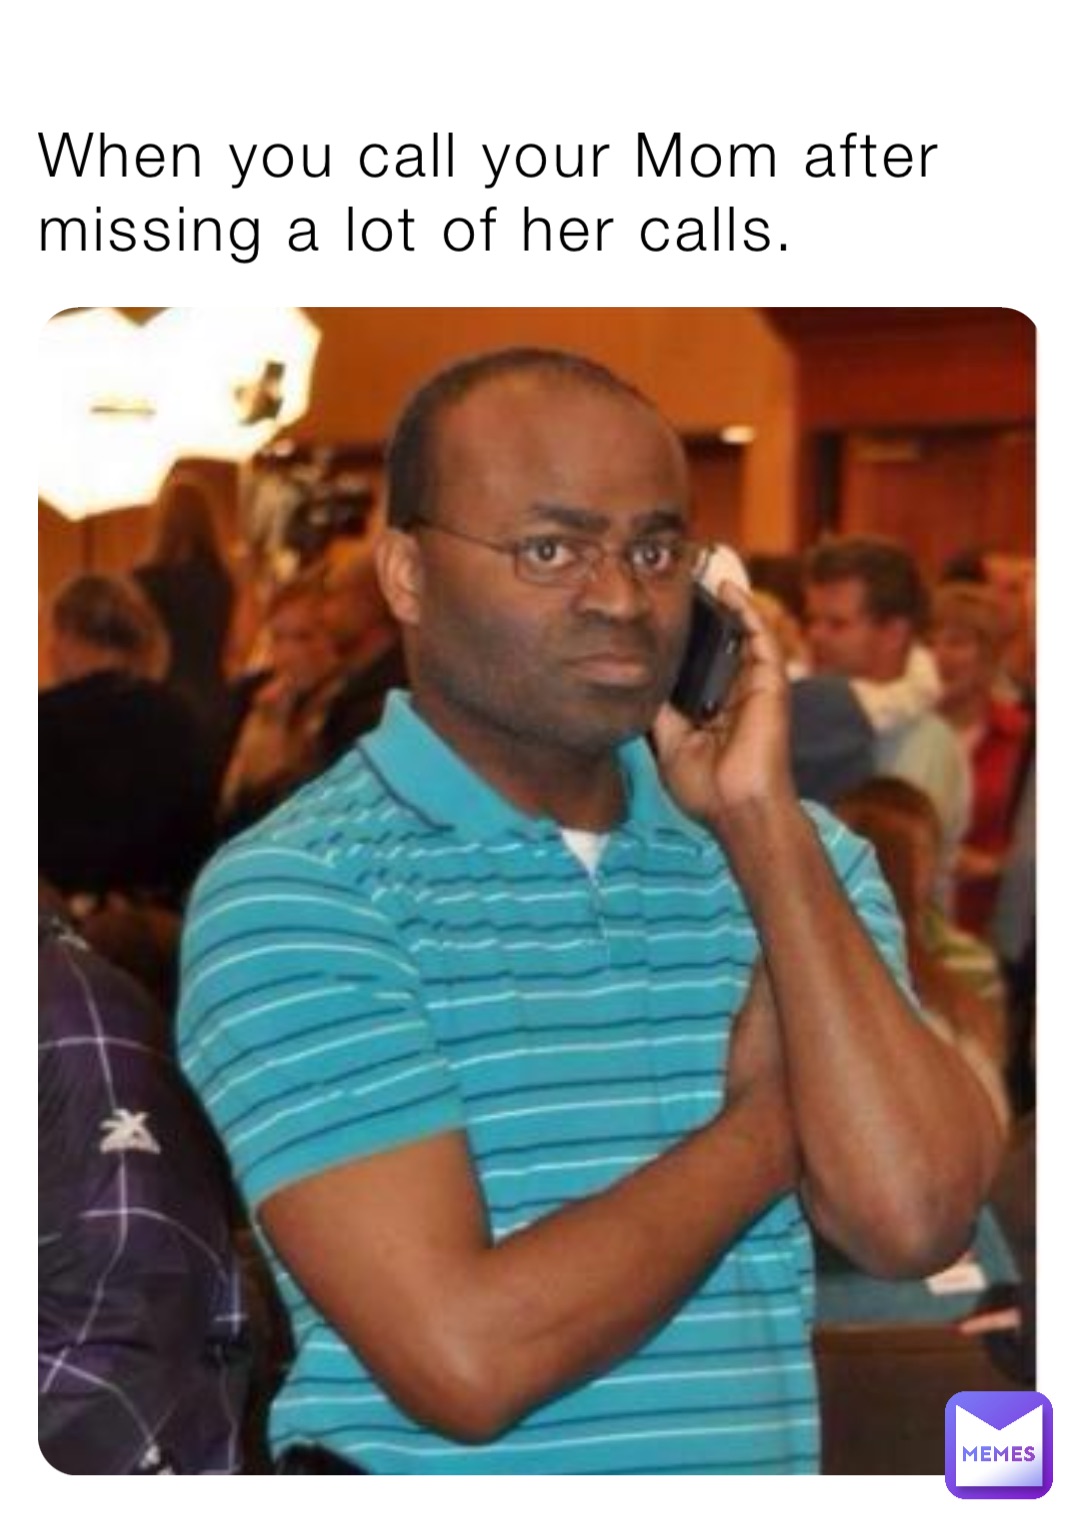 When you call your Mom after missing a lot of her calls.